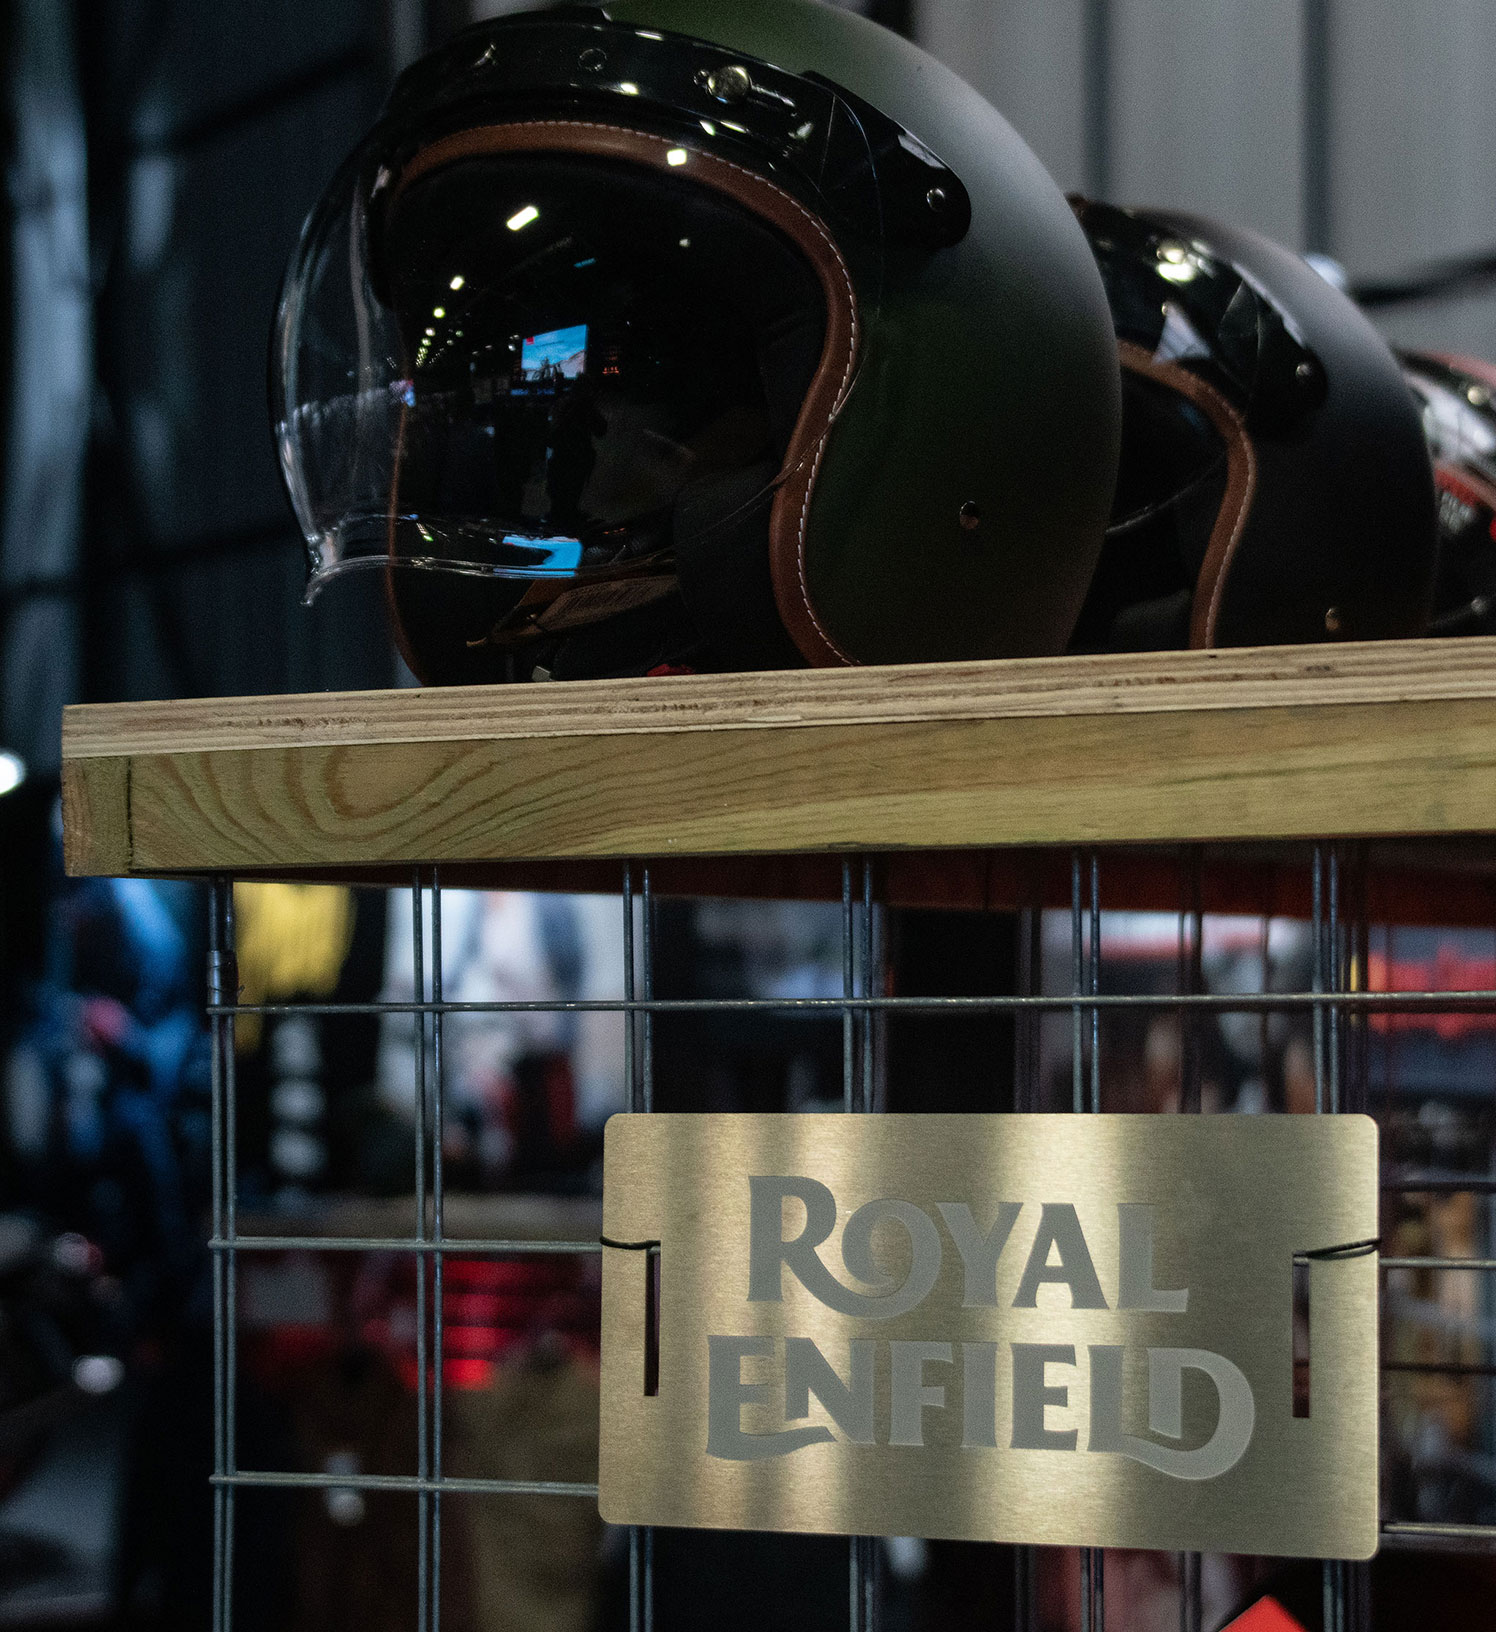 Space-worldwide-Royal Enfield trade show marketing material industrial design